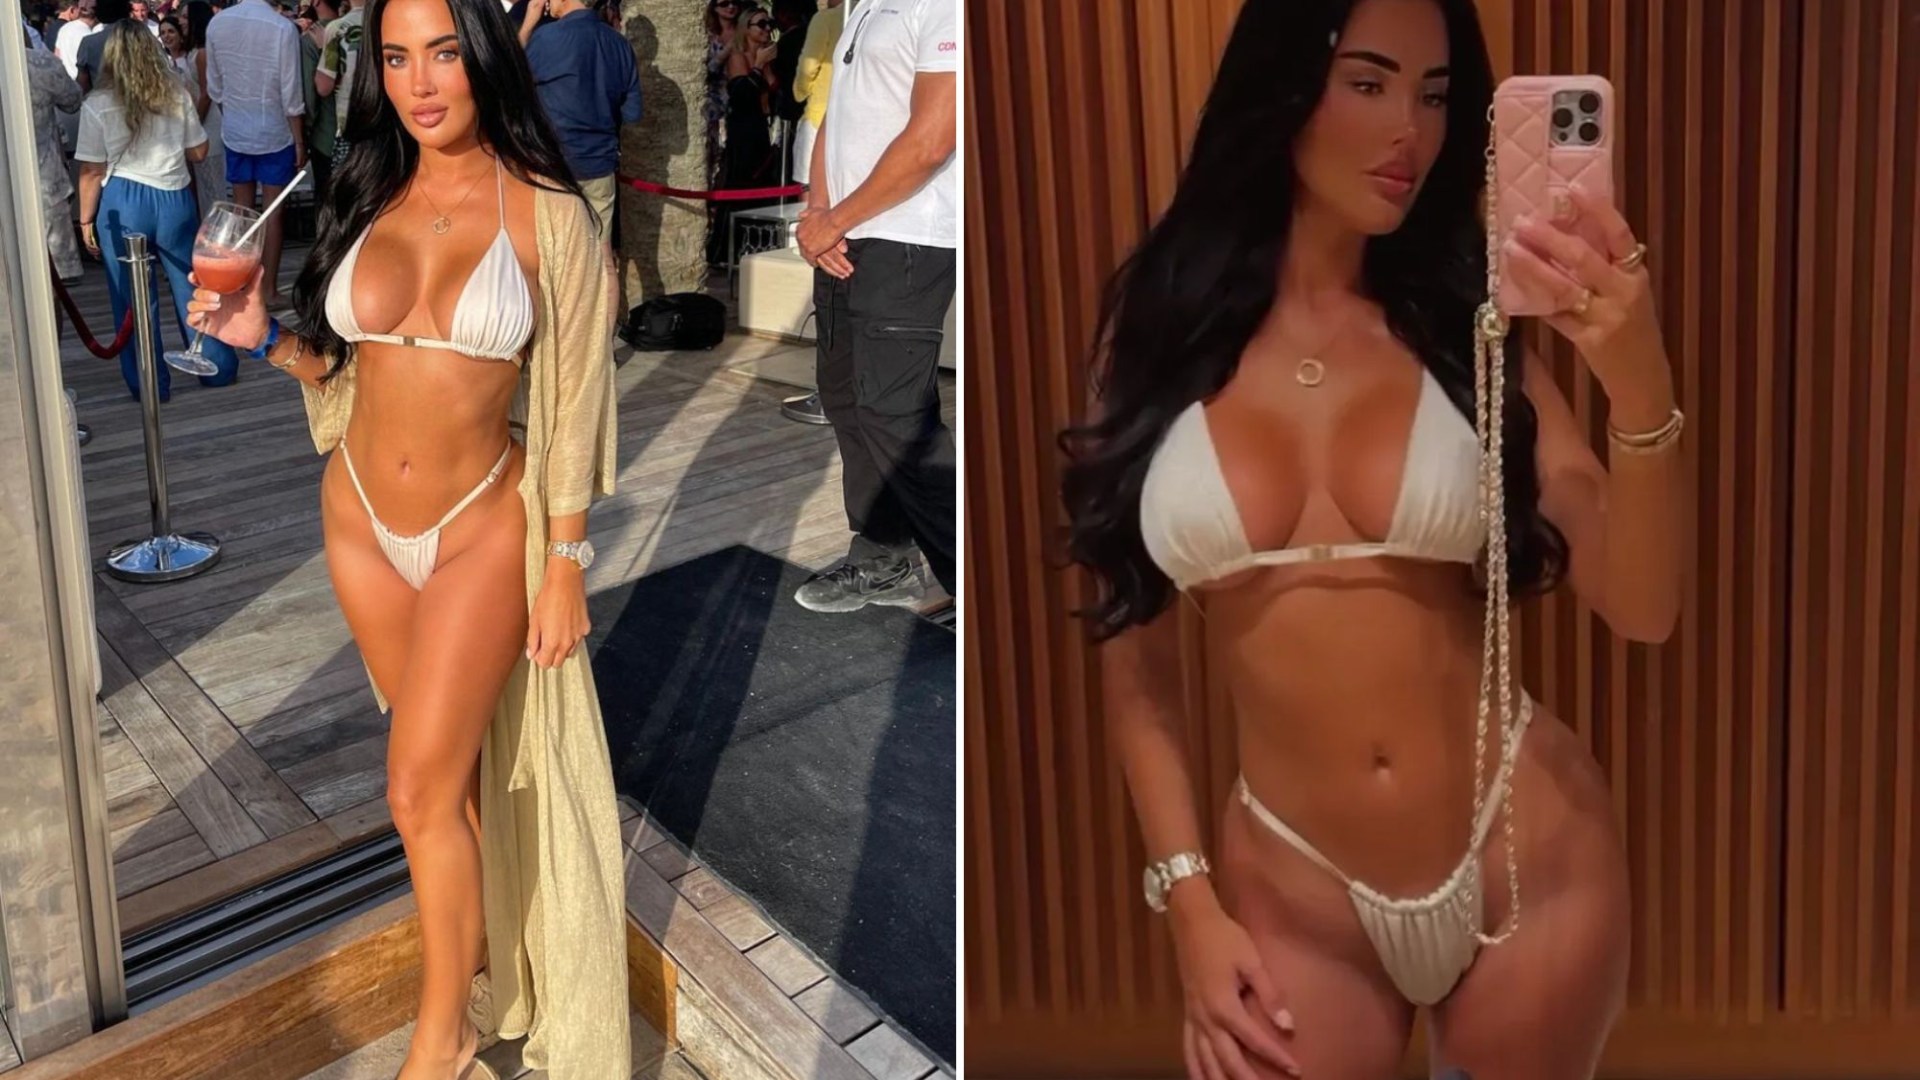 Towies Yazmin Oukhellou strips down to very daring bikini after being snubbed by former co-stars [Video]